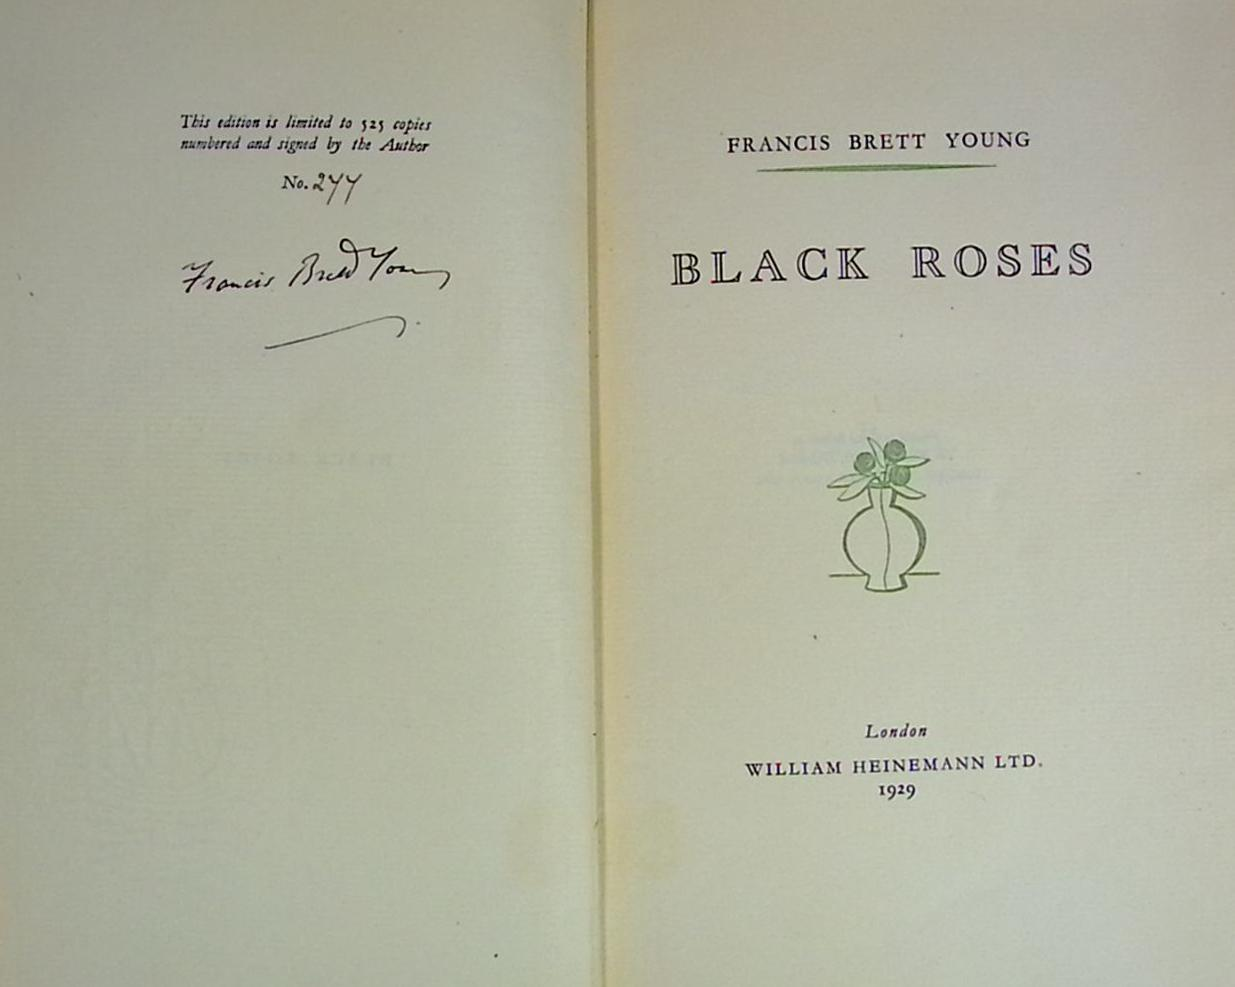 Black Roses. Signed Limited Edition.